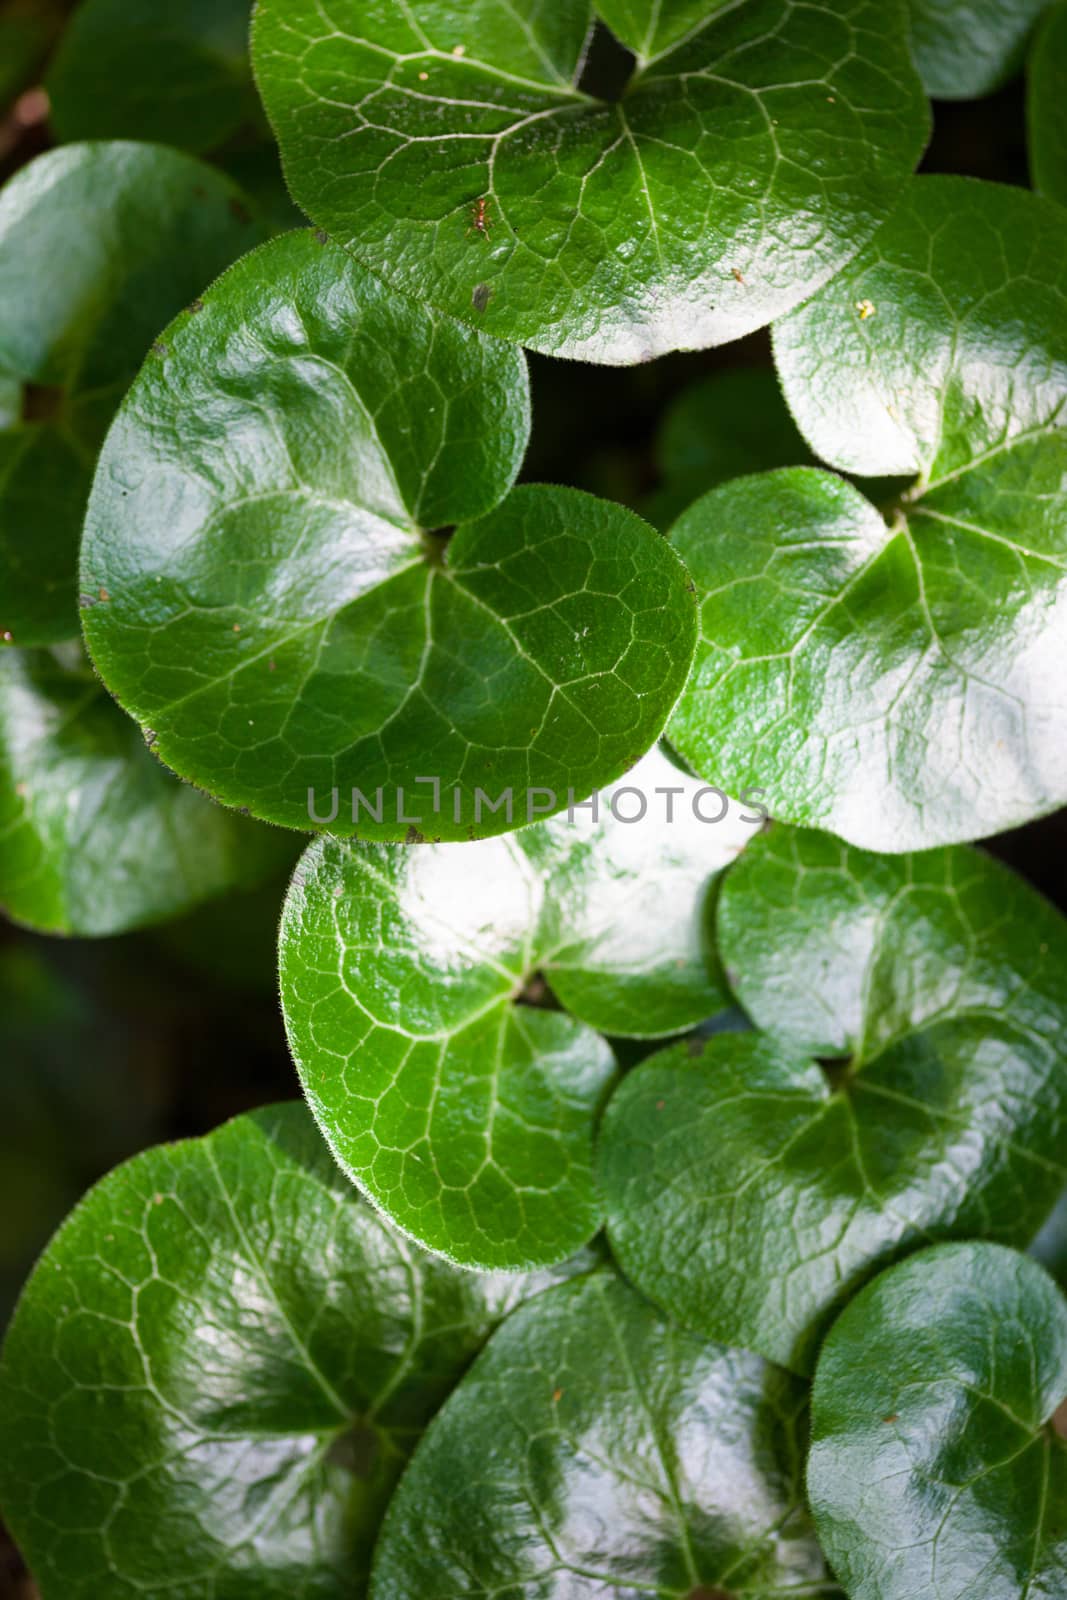 Shiny green leaves of asarabacca (Asarum europaeum) by rootstocks